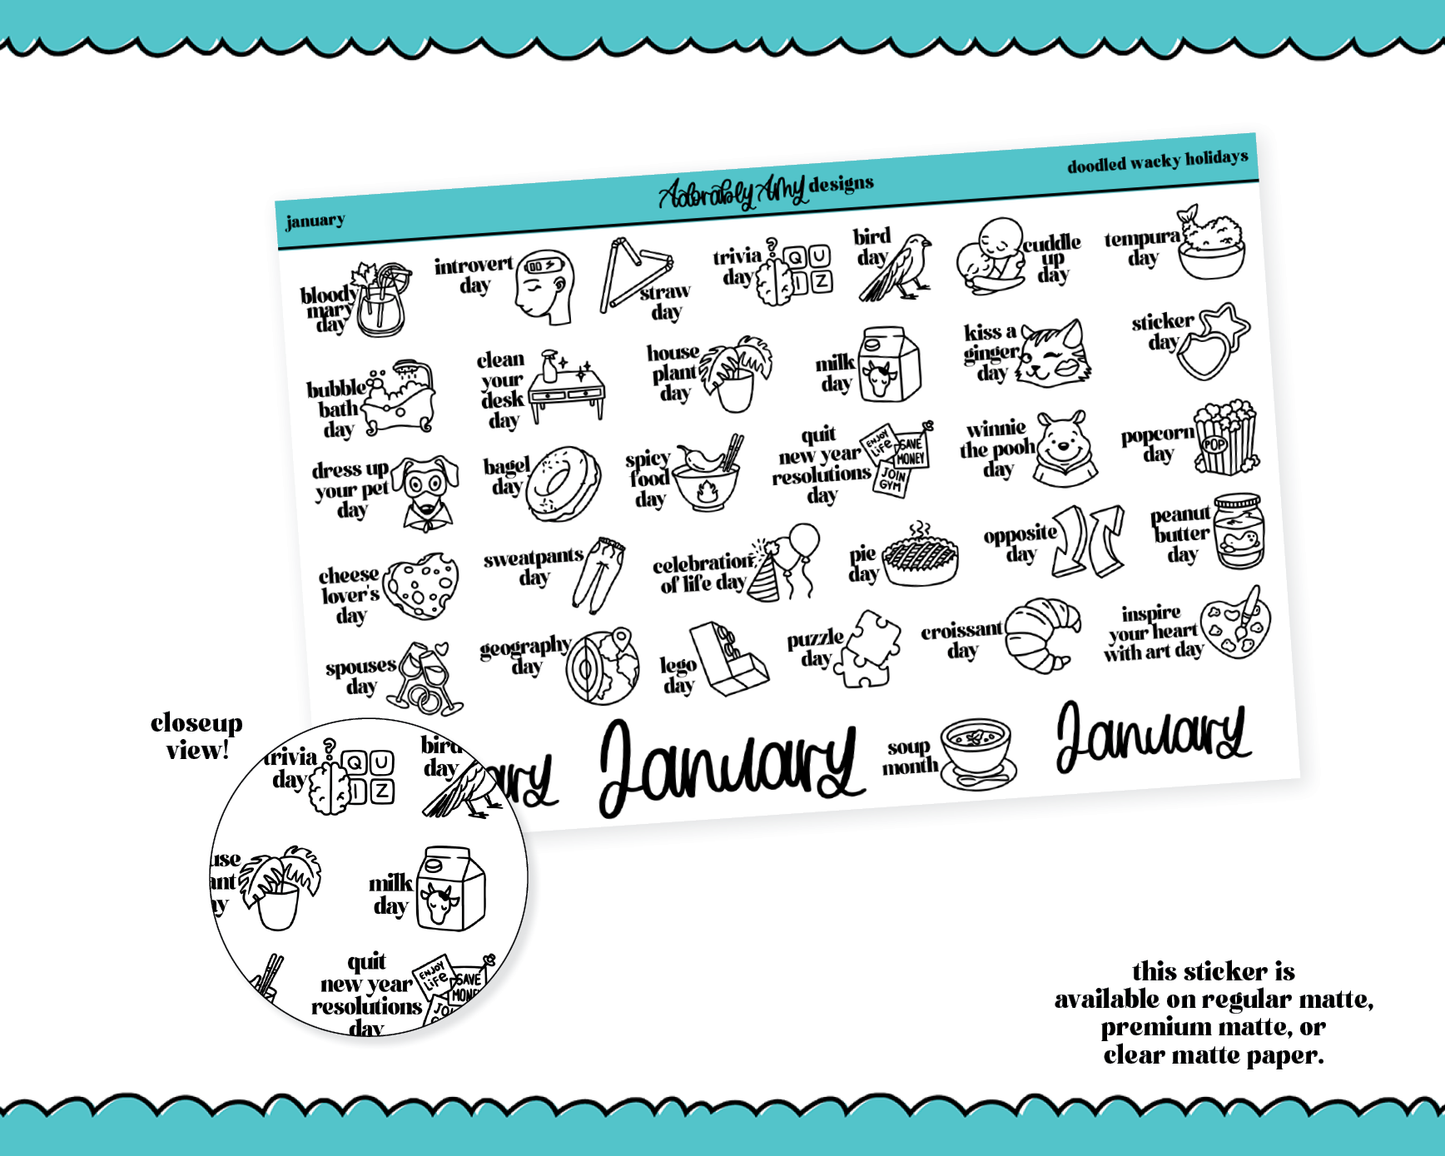 January Doodled Wacky Holidays Reminder Tracker Stickers for any Planner or Insert